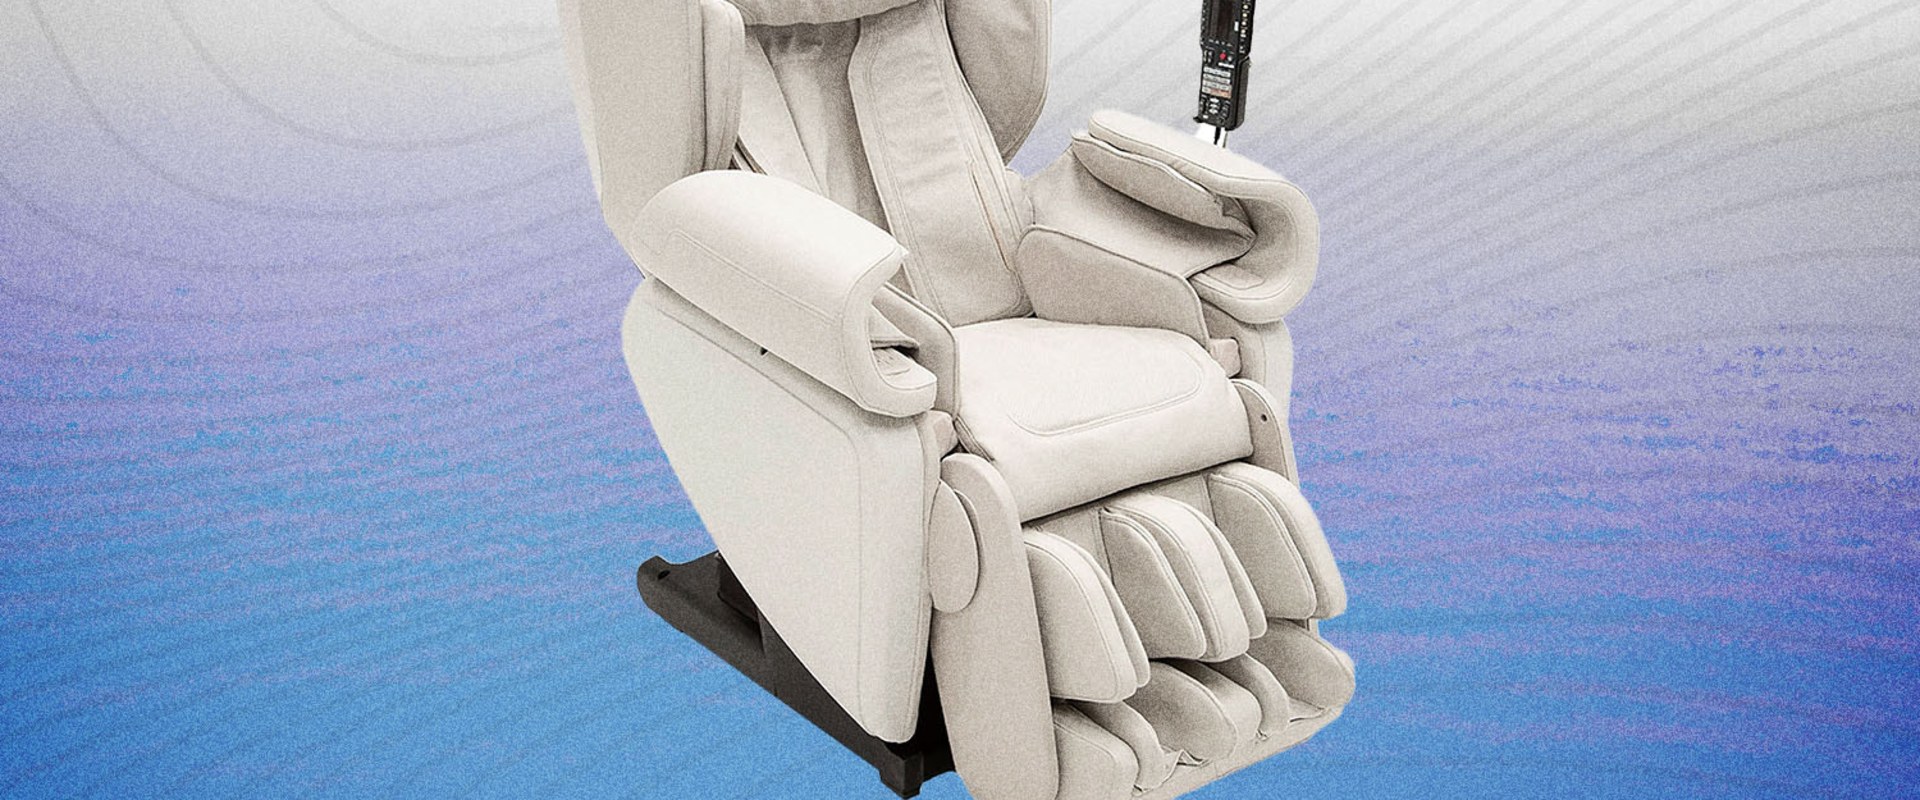 The Benefits of Massage Chairs and How to Use Them Sparingly